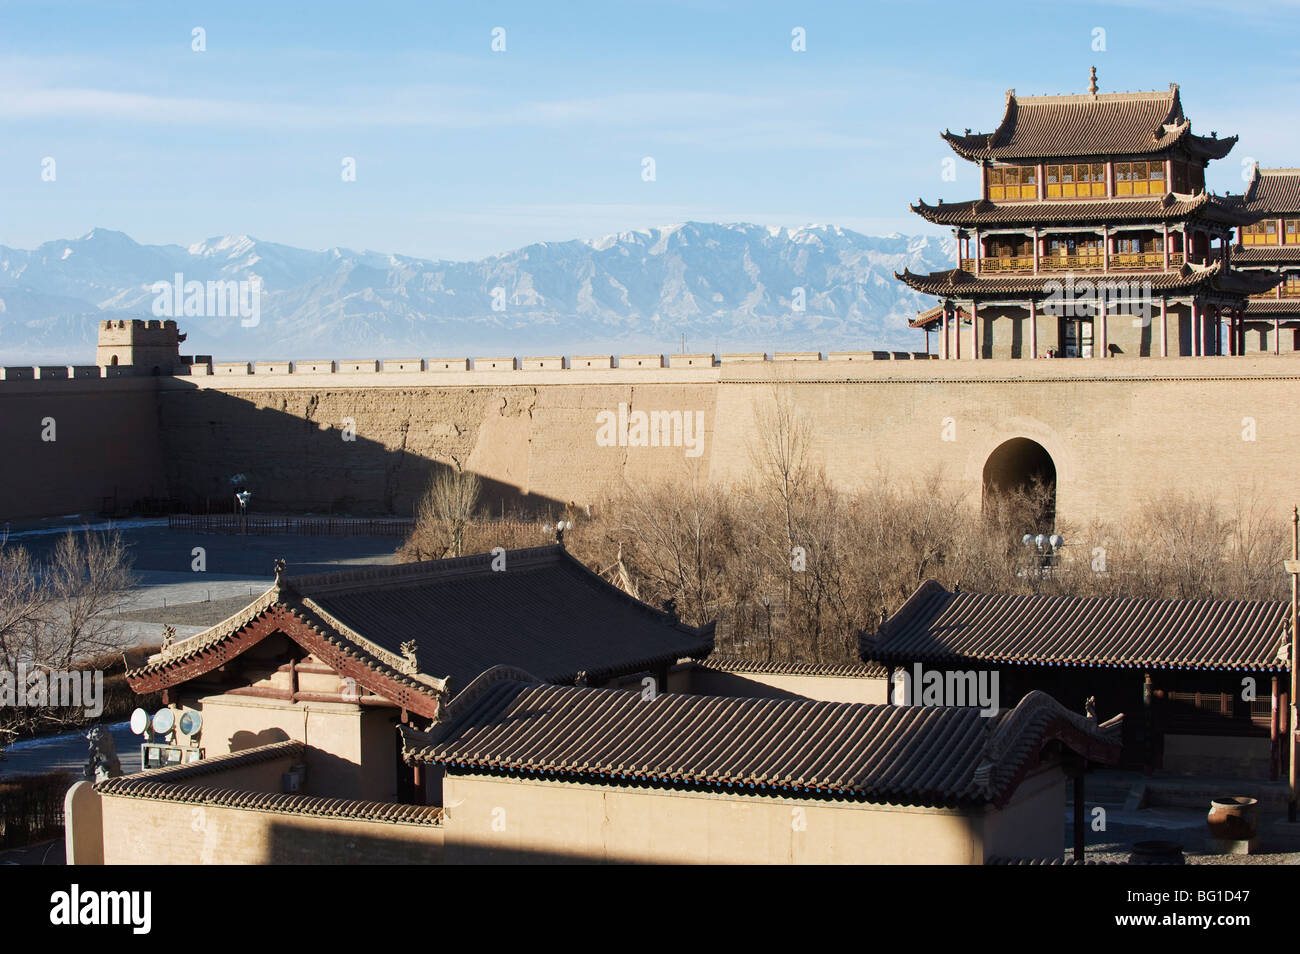 Ming dynasty Jiayuguan Fort dating from 1372, with Qilan Shan mountains in the Hexi Corridor, Gansu Province, China,  Asia Stock Photo